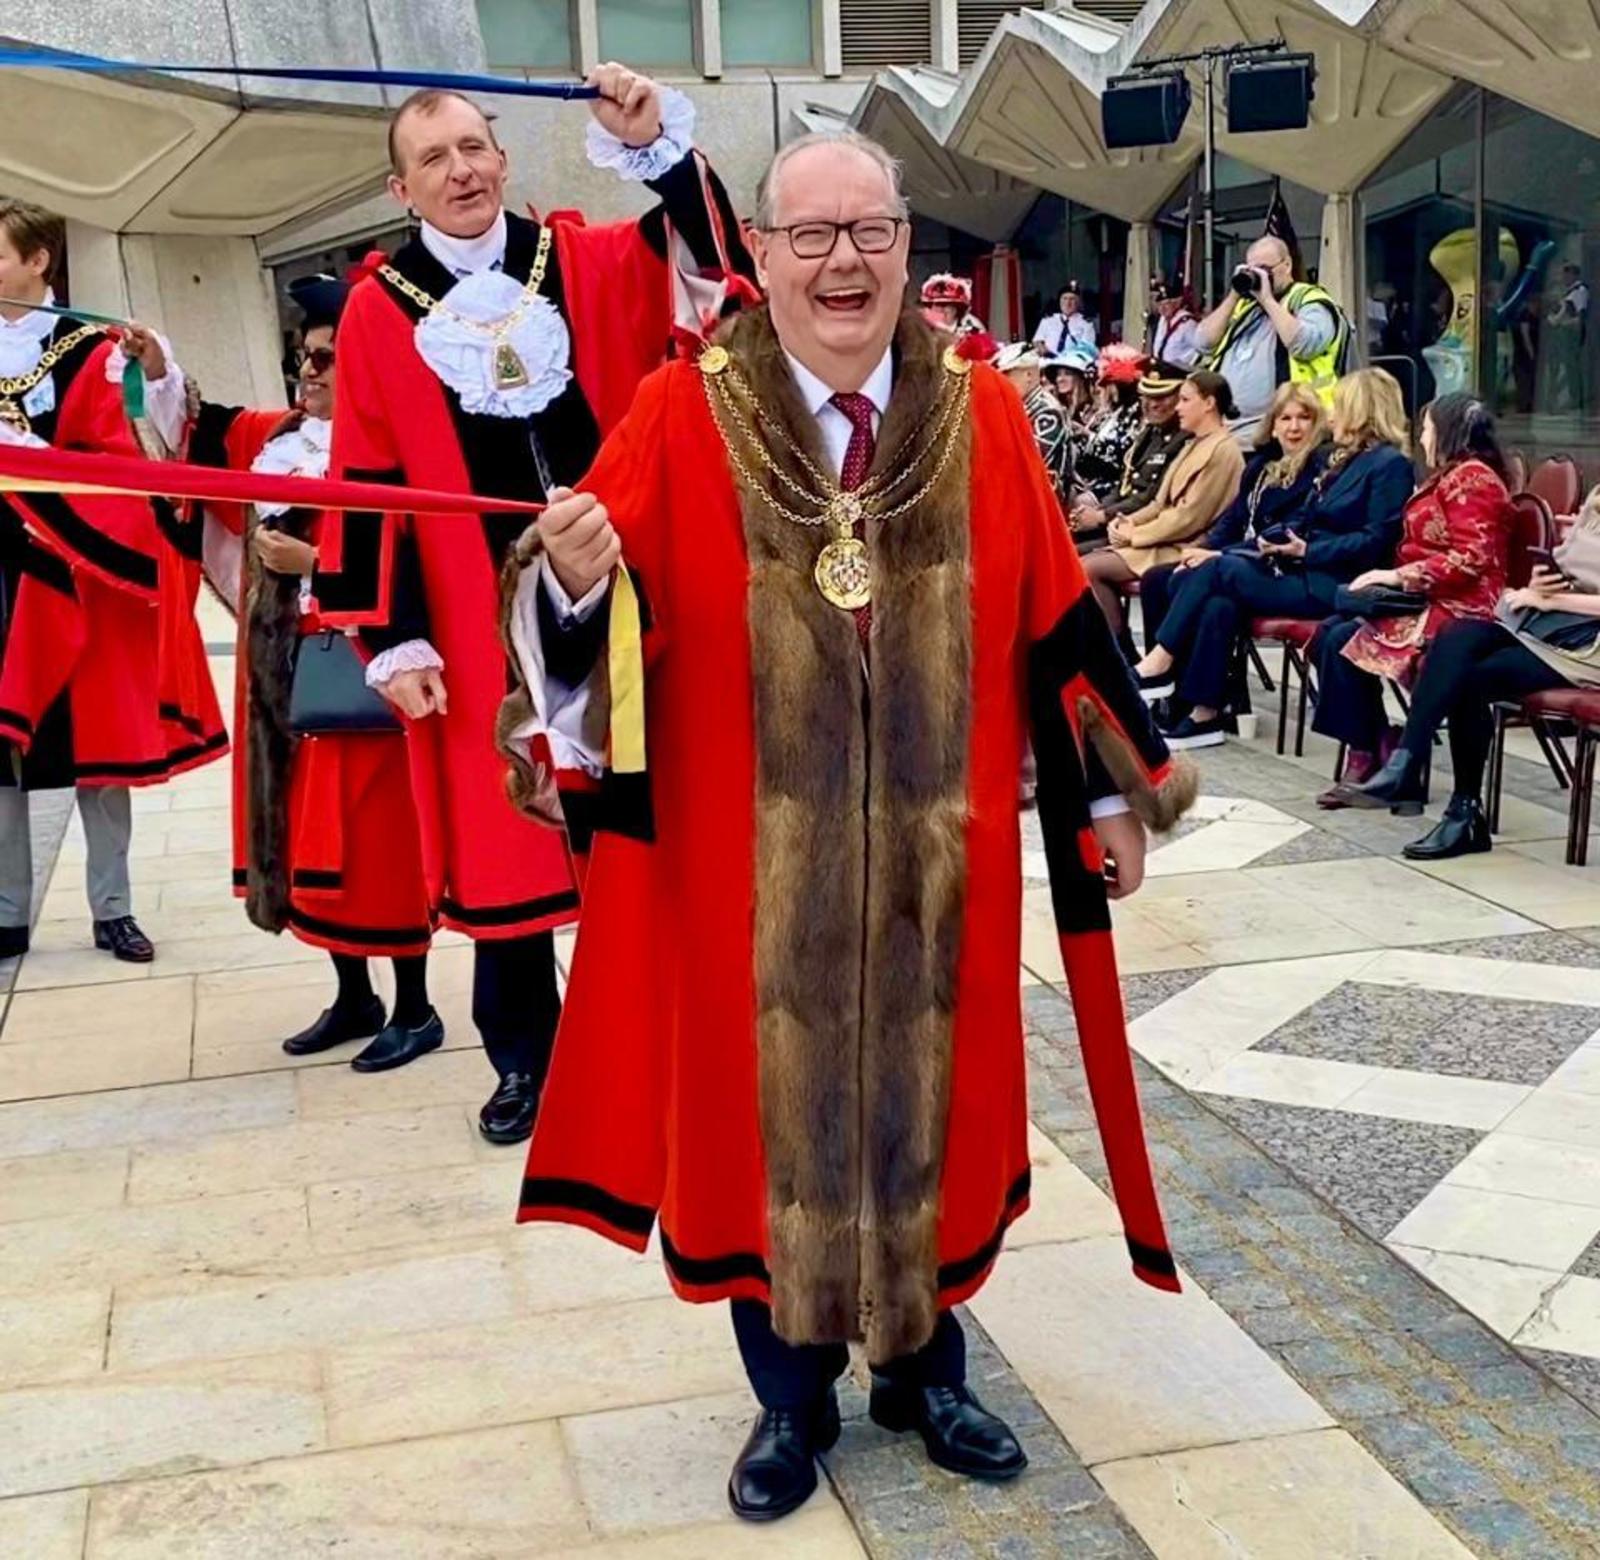 24 September 2023 - Great fun to lead all the London Mayors around the Maypole in Guildhall Yard at the Pearly Kings and Queen’s Harvest celebrations